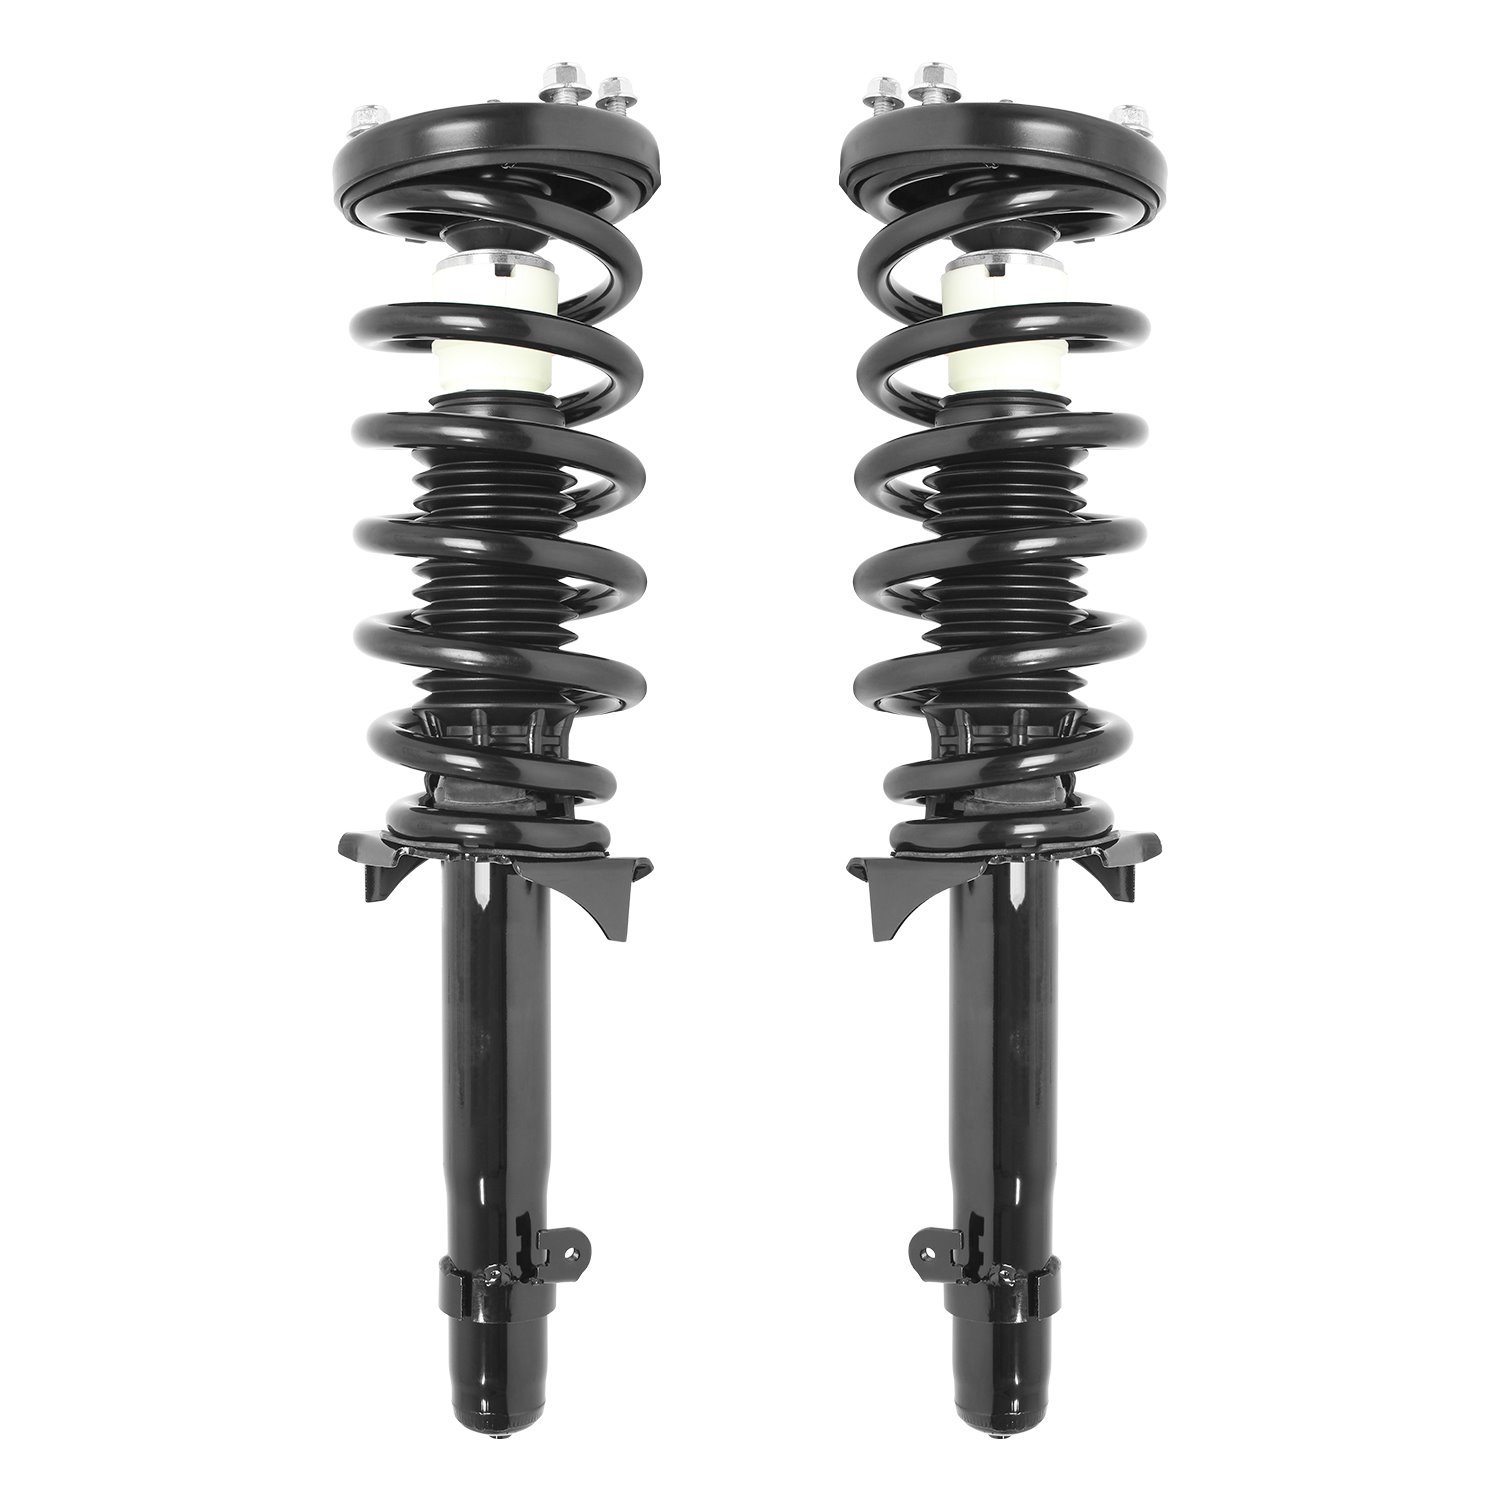 2-11827-11828-001 Suspension Strut & Coil Spring Assembly Set Fits Select Acura TSX